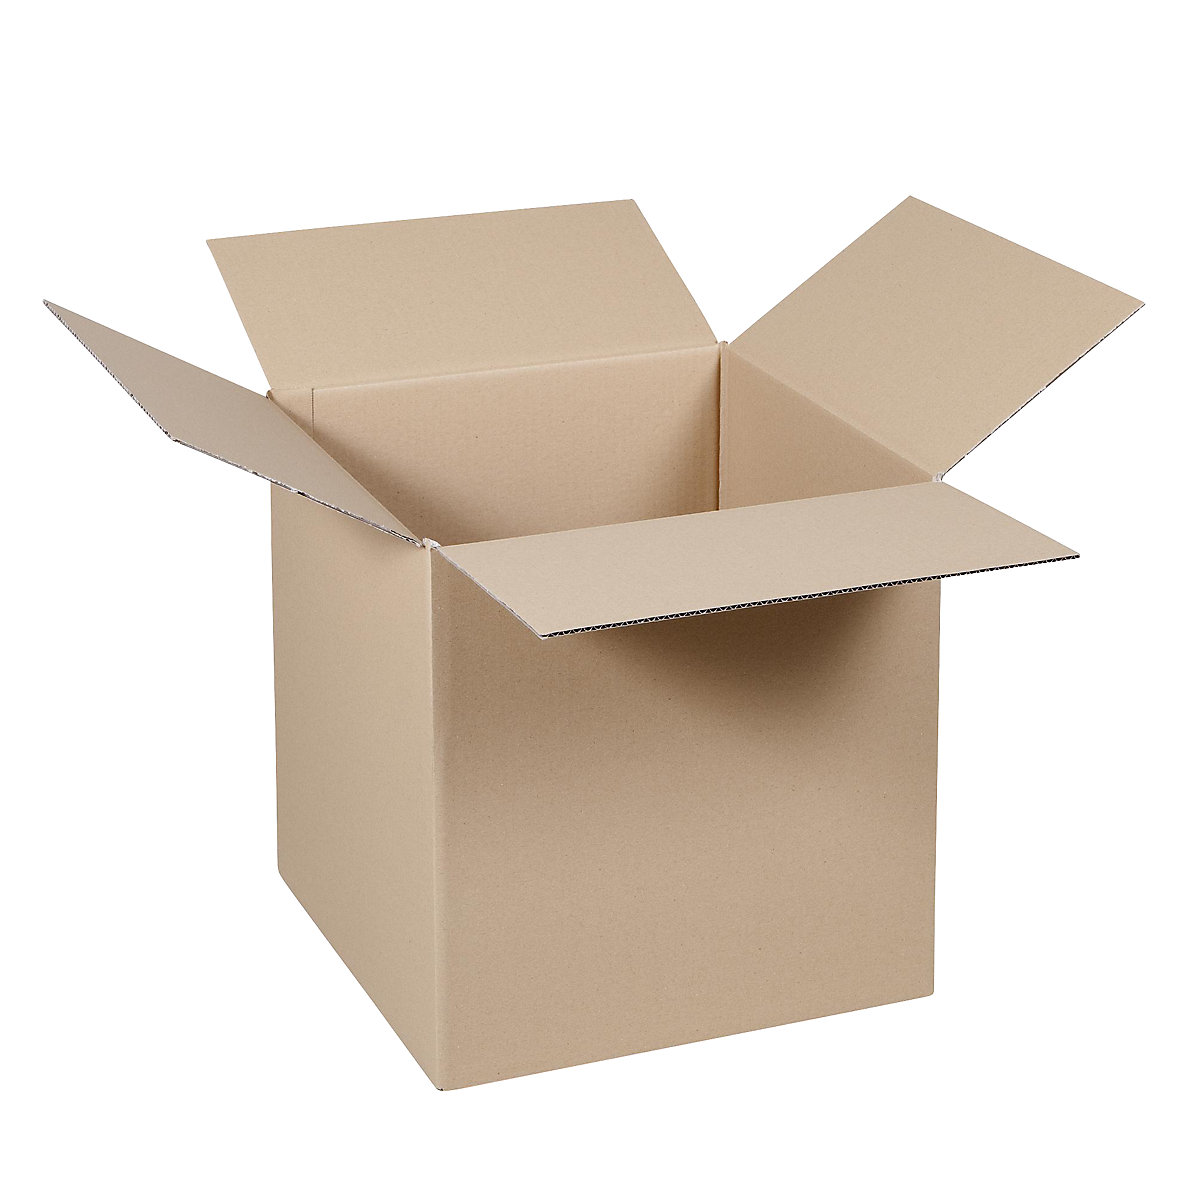 Folding cardboard box, FEFCO 0201, made of double fluted cardboard, internal dimensions 450 x 450 x 450 mm, pack of 50-22